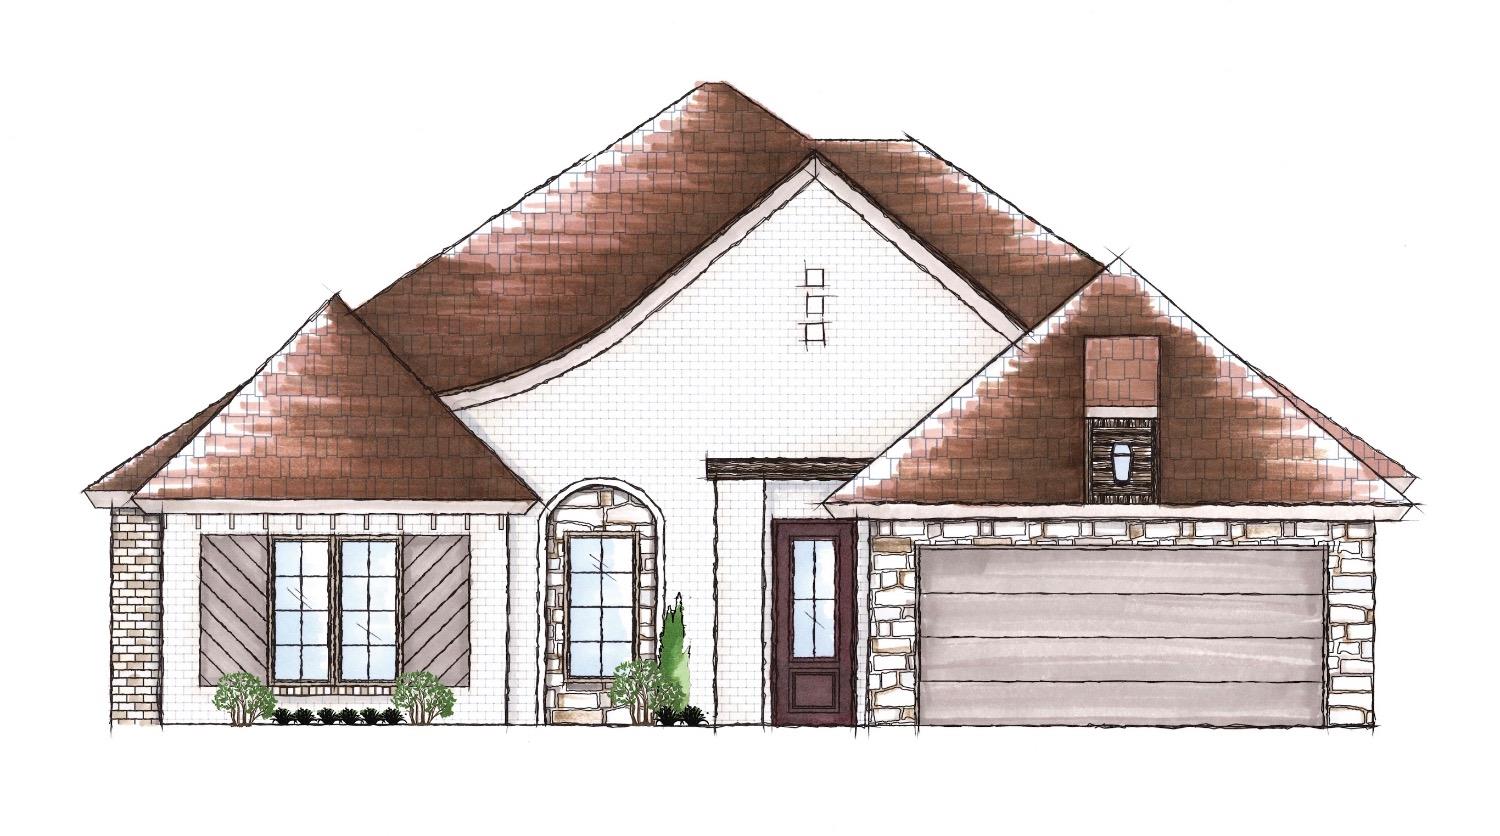 $15,000 BUYER INCENTIVE!! Southern Homes by Dan Wilson is proud to present The Waverly, a beautifully crafted new construction home for you and your family. This home is uniquely designed with you in mind. You will be sure to find custom details and gorgeous selections throughout. Hatton Place is located south of 122nd Street and west of Indiana Avenue. It is south of Lubbock-Cooper's Laura Bush Middle School. The newest retail stores, grocery stores and restaurants are conveniently located nearby. Trusted home builder, quality construction and a wonderful new neighborhood...WELCOME HOME! Call the Southern Homes Sales Team or your favorite realtor today! (All selections subject to change*)